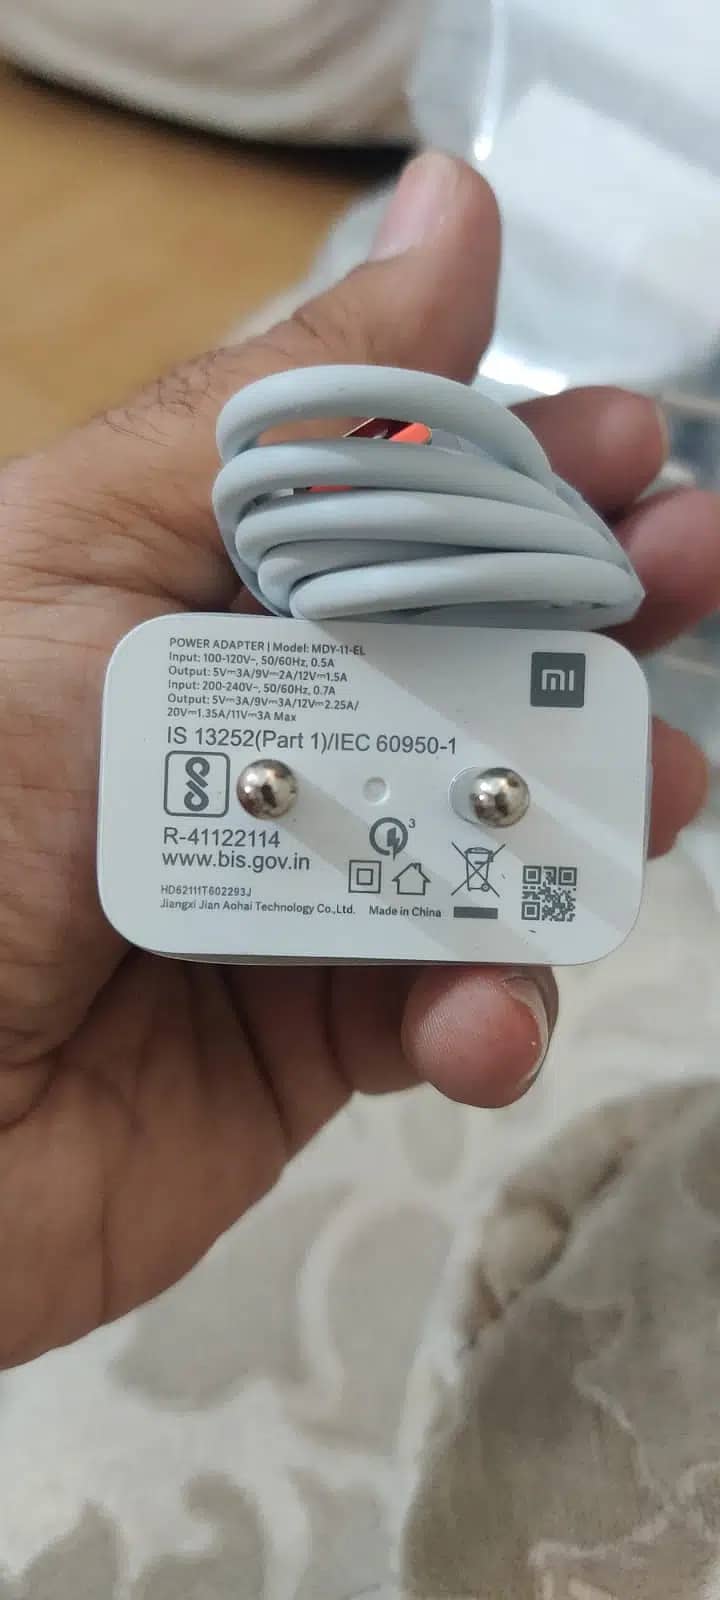 200% Original MI Charger 33W, One Plus Warp, Samsung Mobile Charger 2